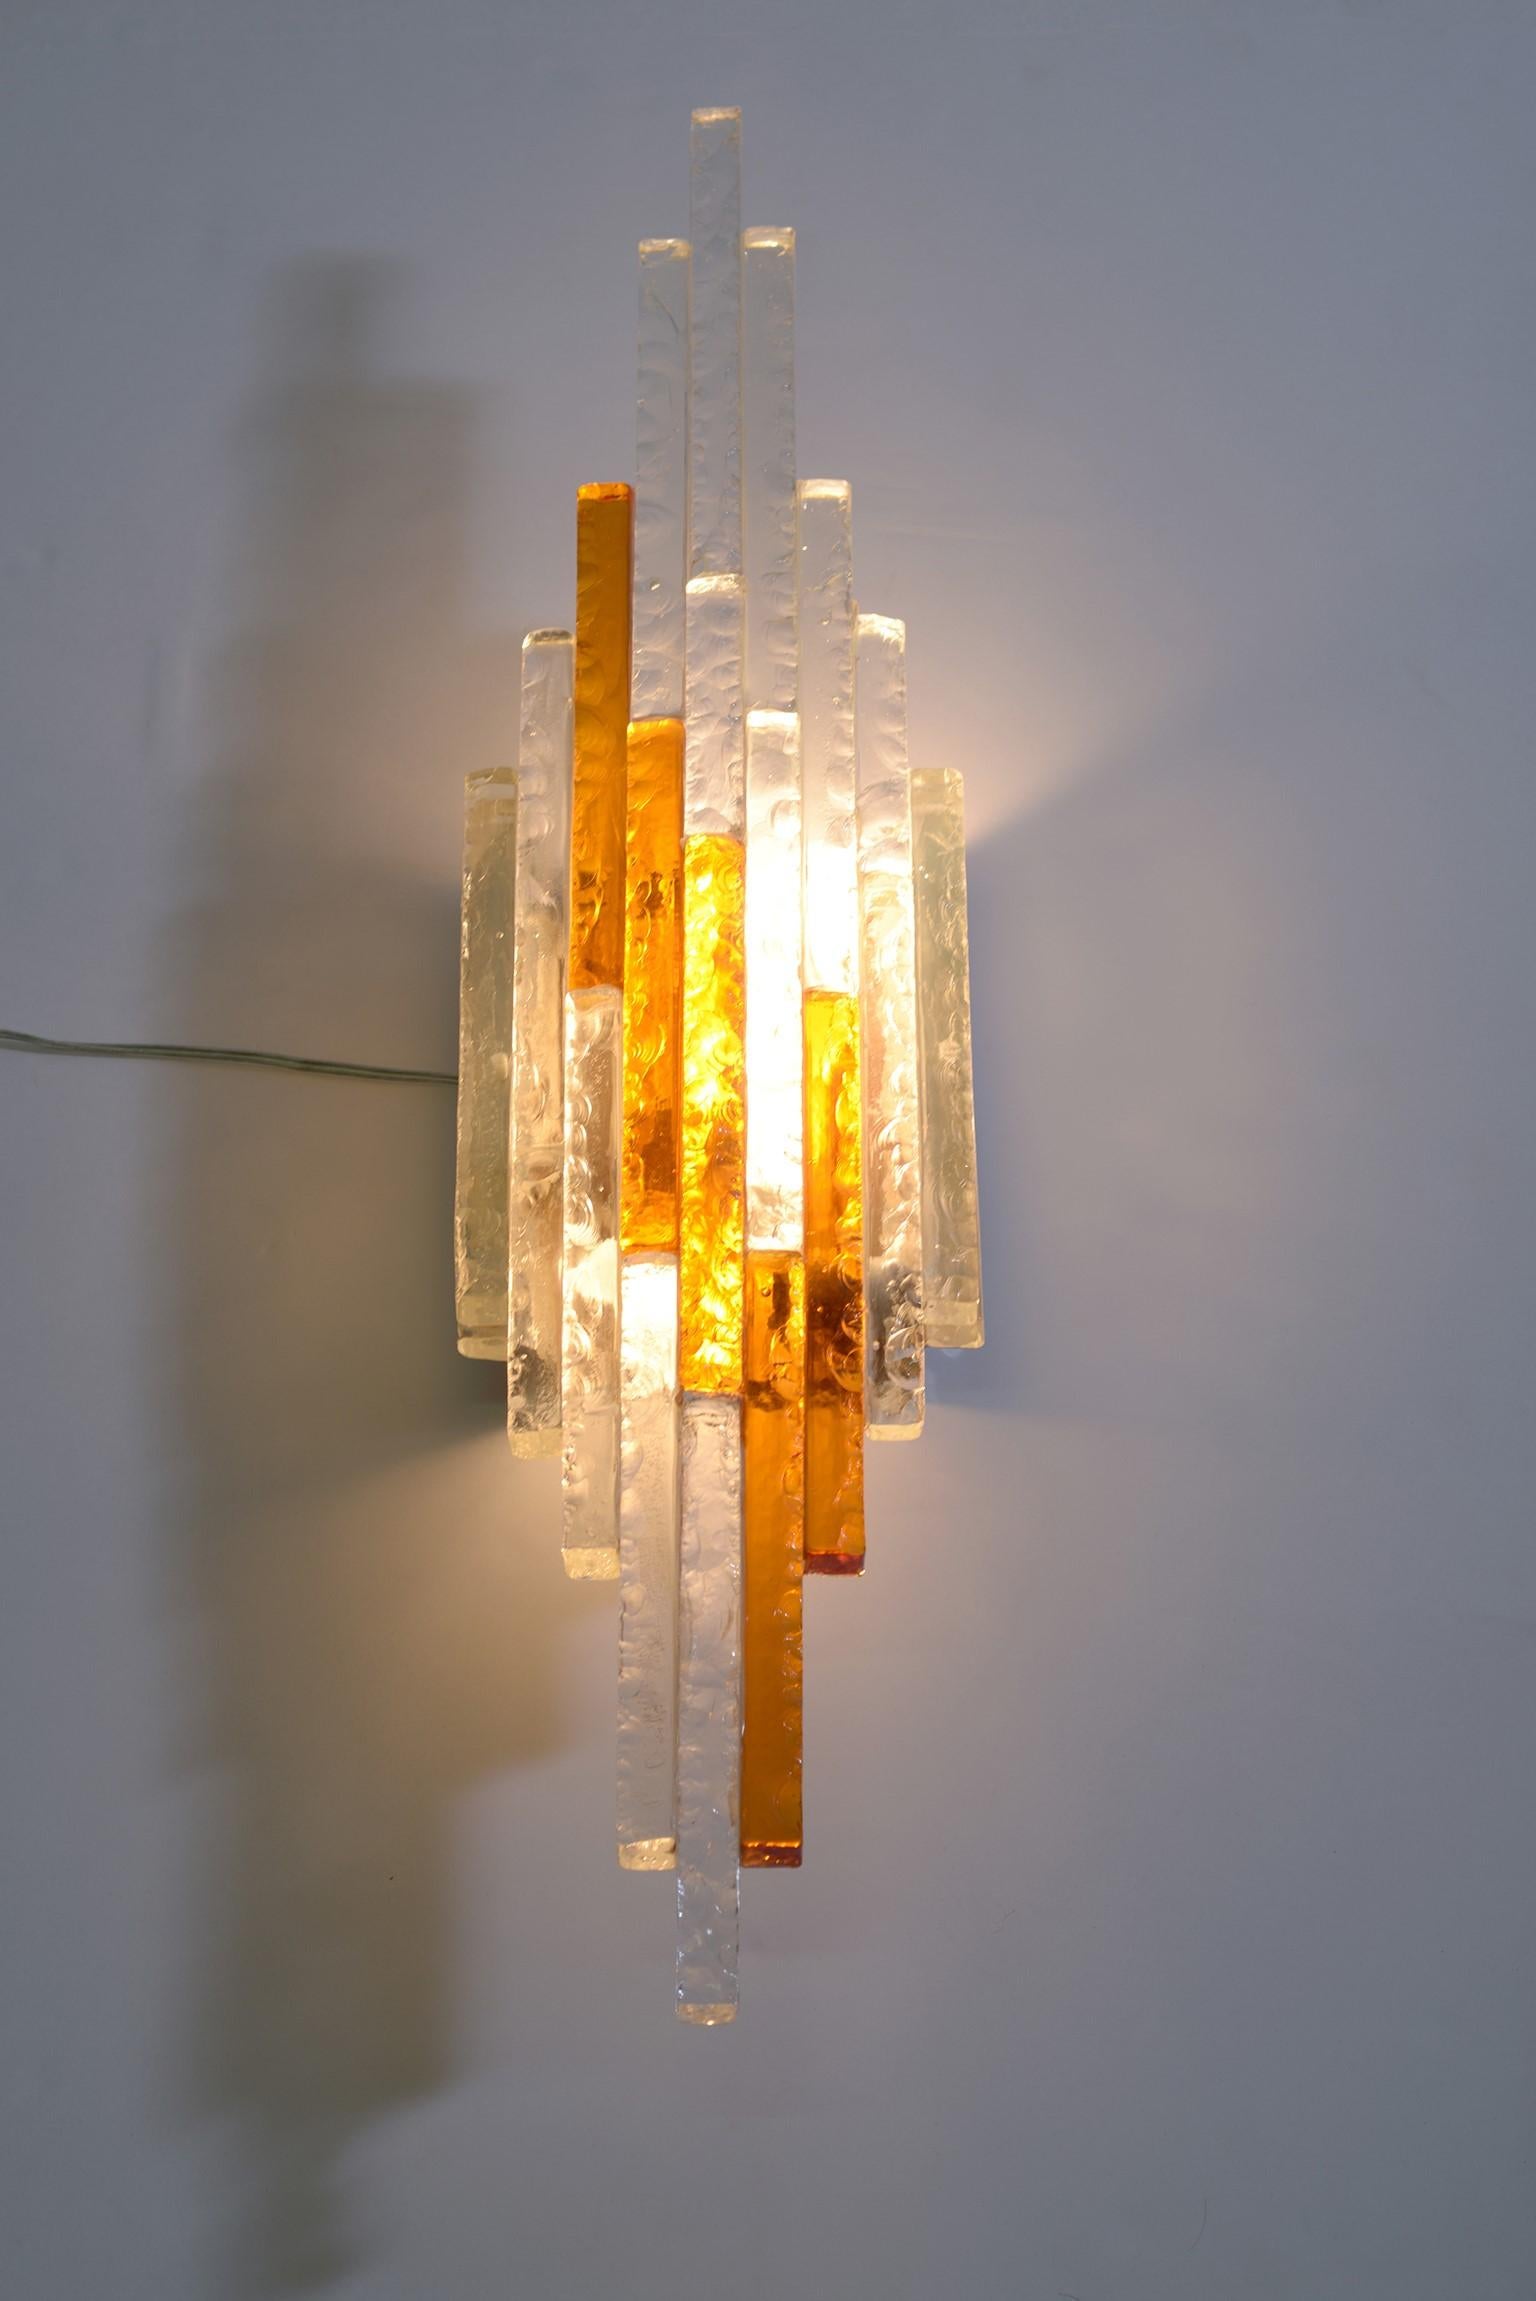 Poliarte 1960s Italian double color, transparent and amber color step degrading chiselled glass wall light -sconces, three little Edison bulbs in a metal structure ich sconce, huge dimensions.
Poliarte Italia midcentury.